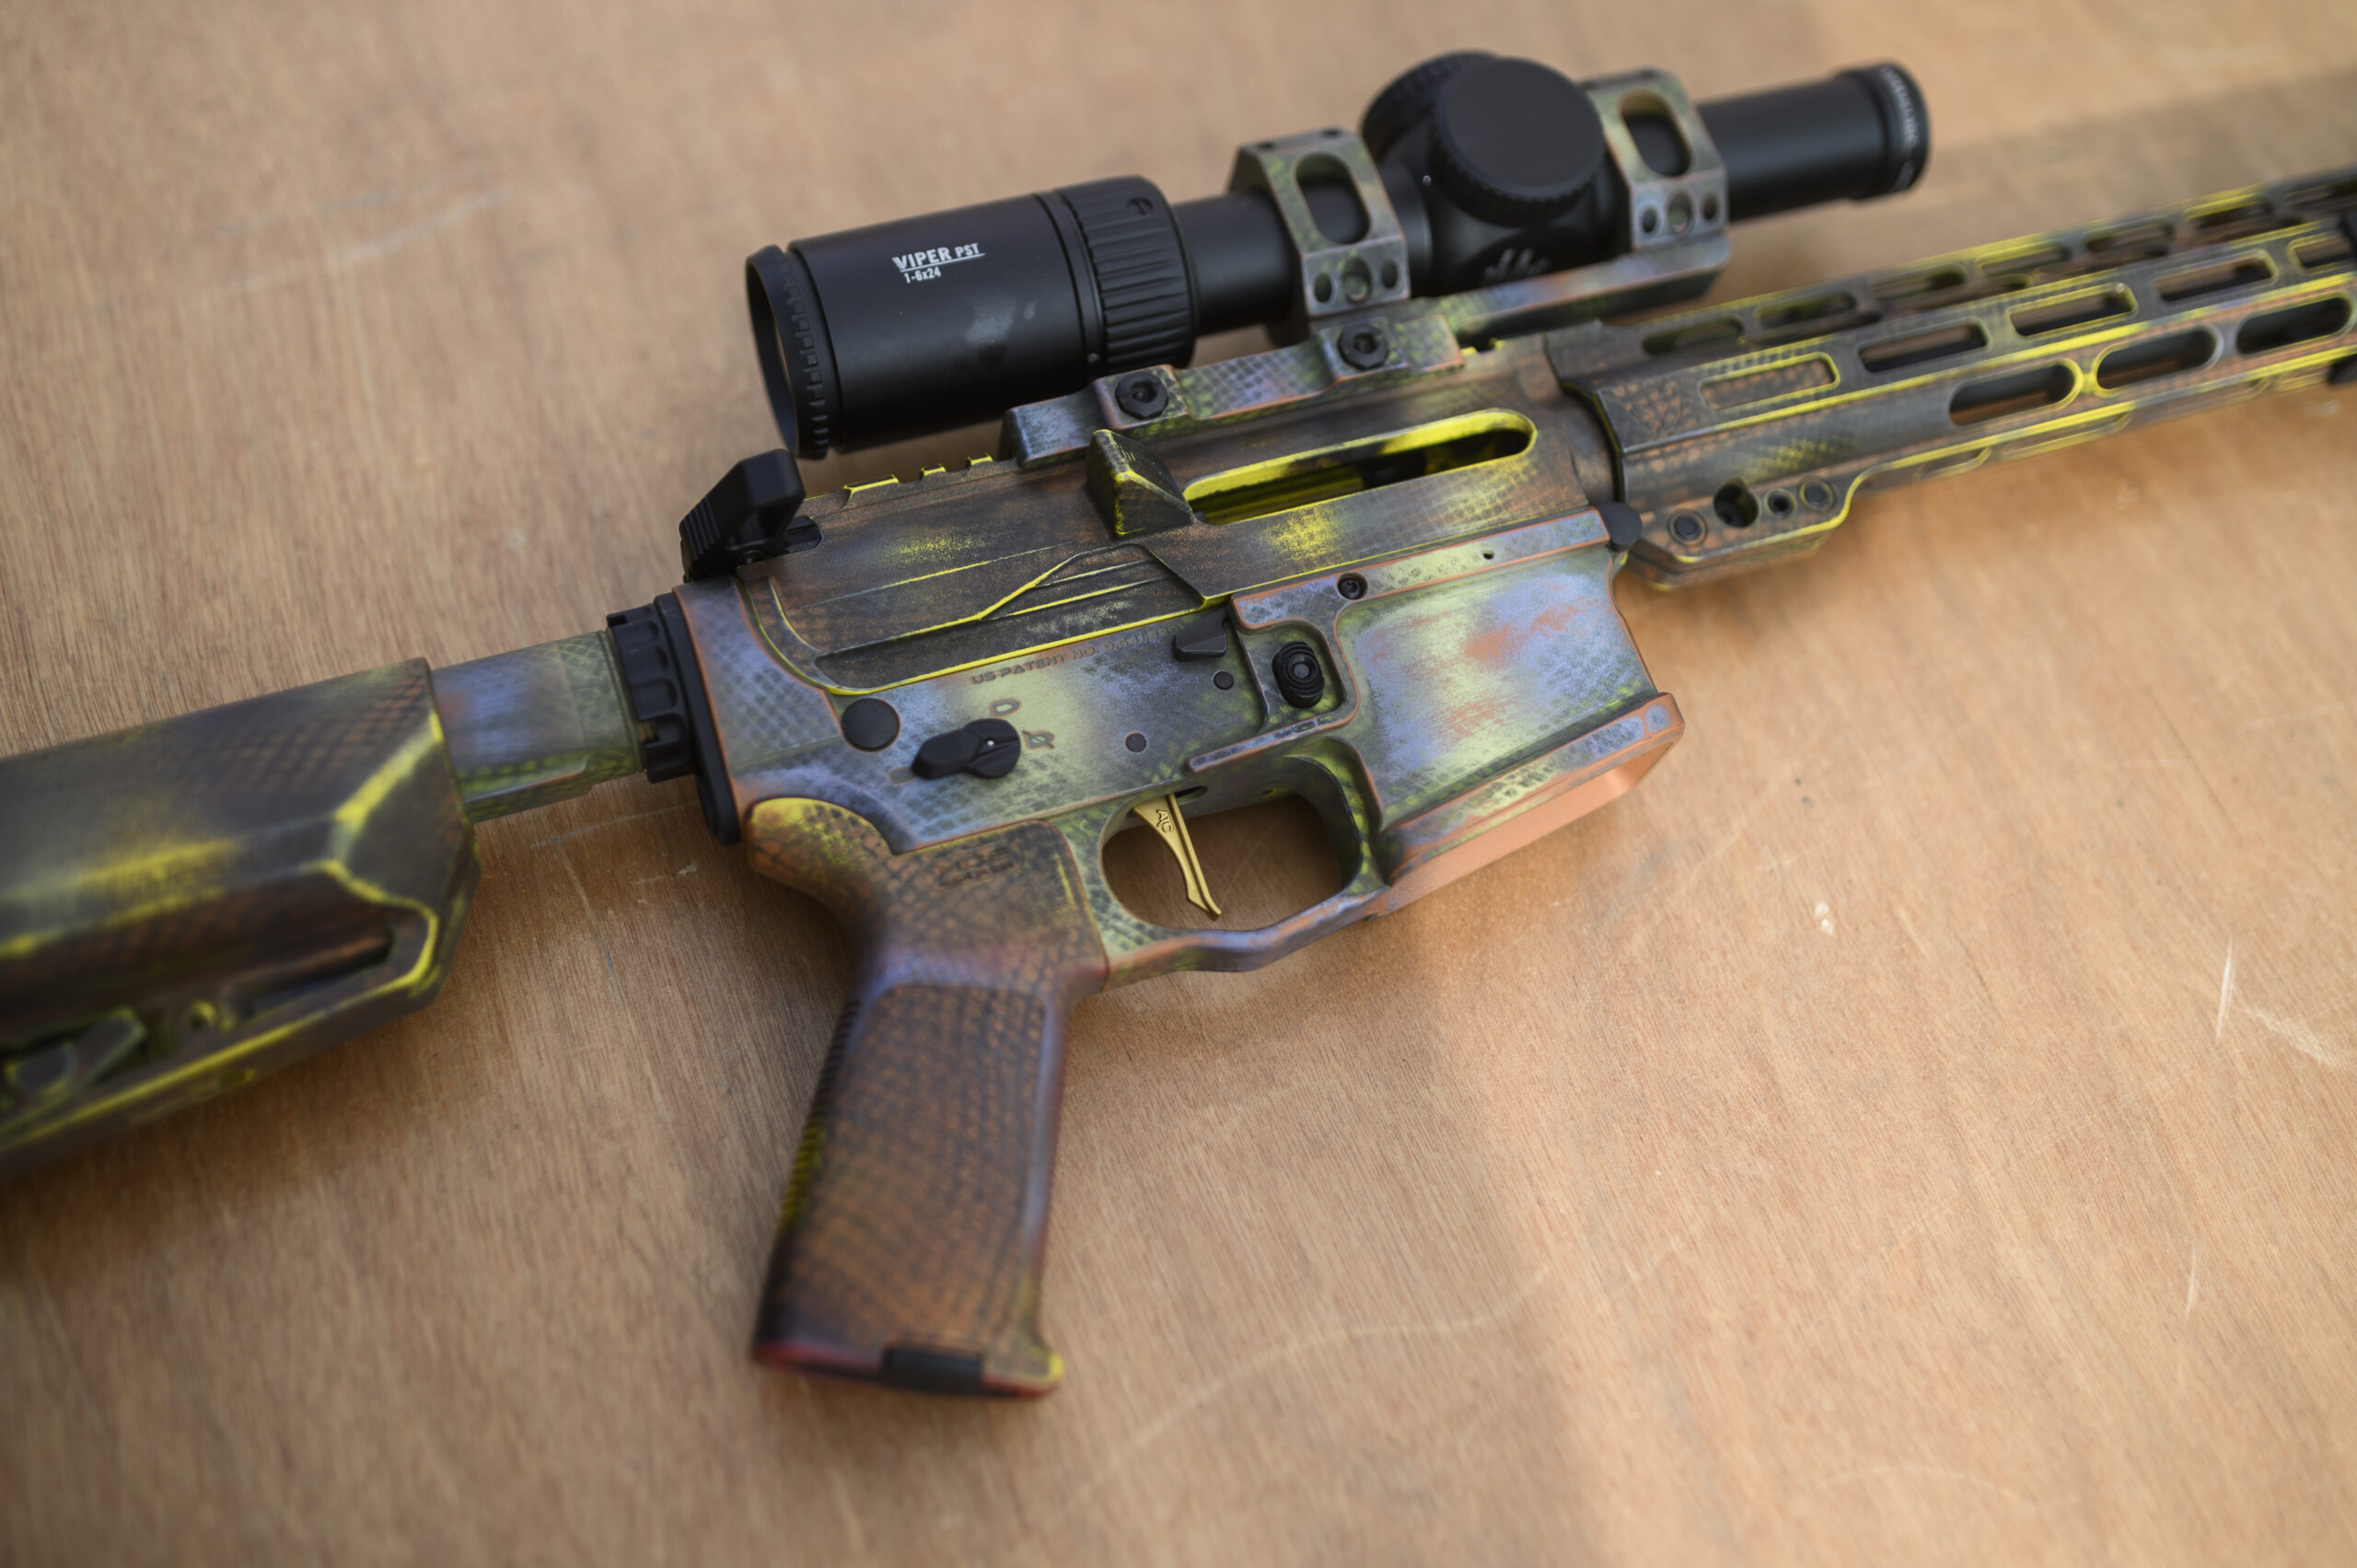 bight colored competition AR rifle topped with a Viper scope